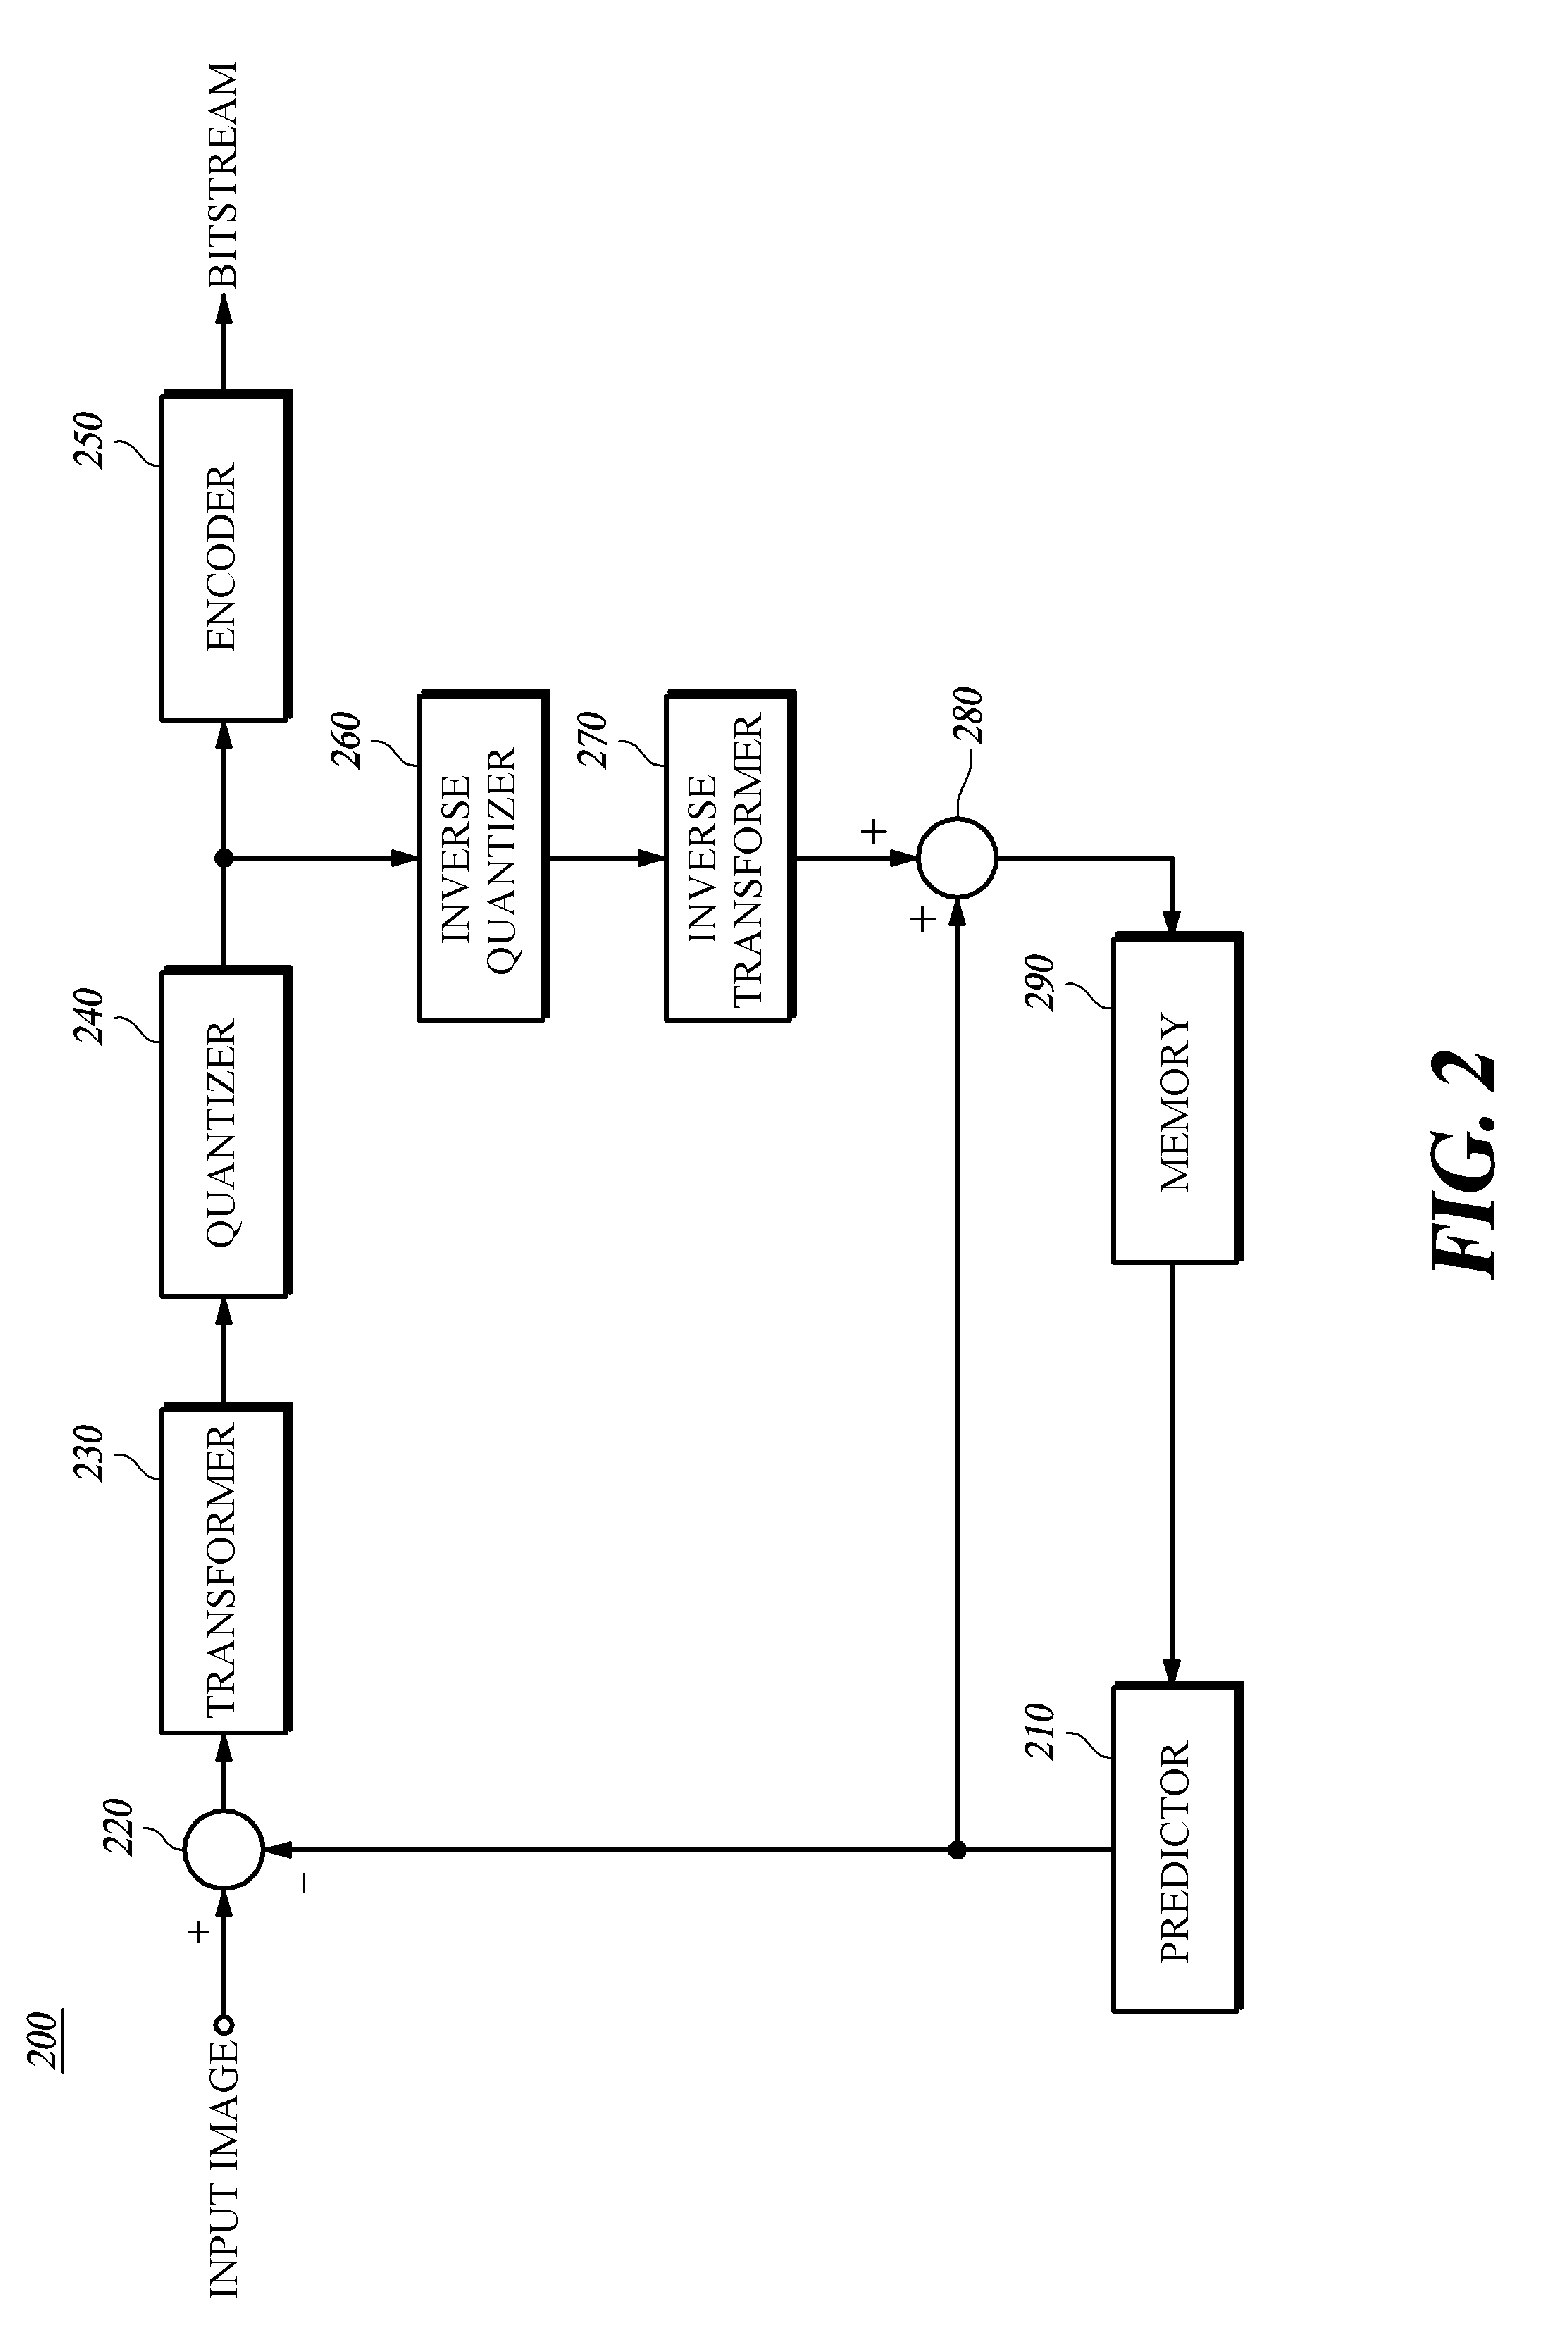 Method and apparatus for encoding/decoding images considering low frequency components